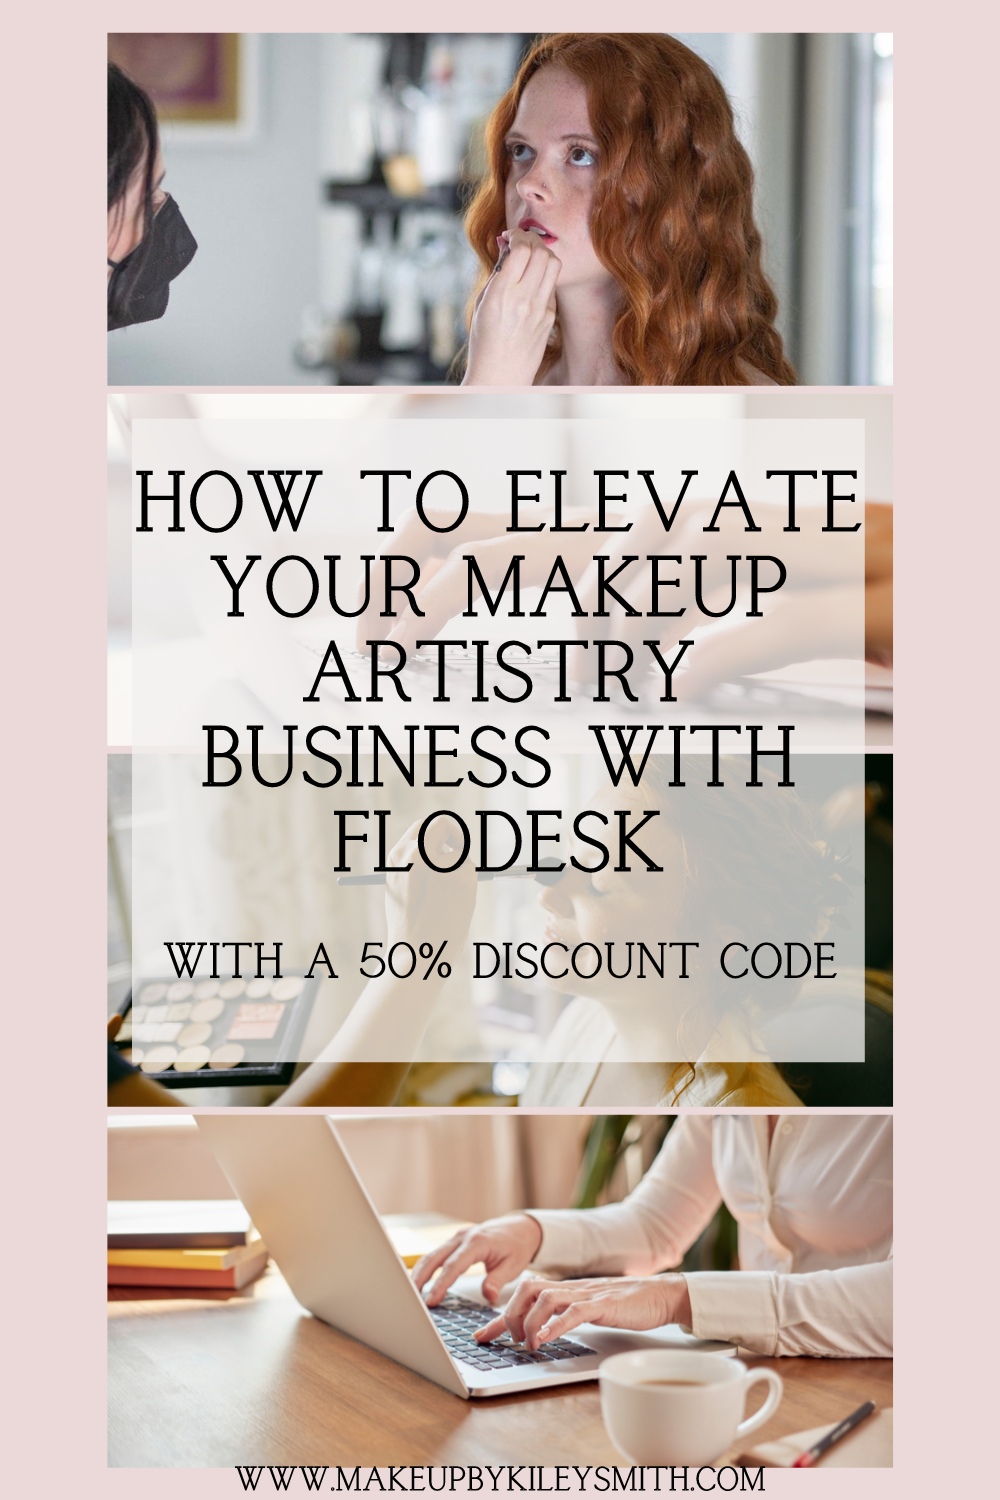 The top photo shows a makeup artist is shown applying makeup to a client. The bottom photo shows a woman typing on her computer keyboard using FloDesk